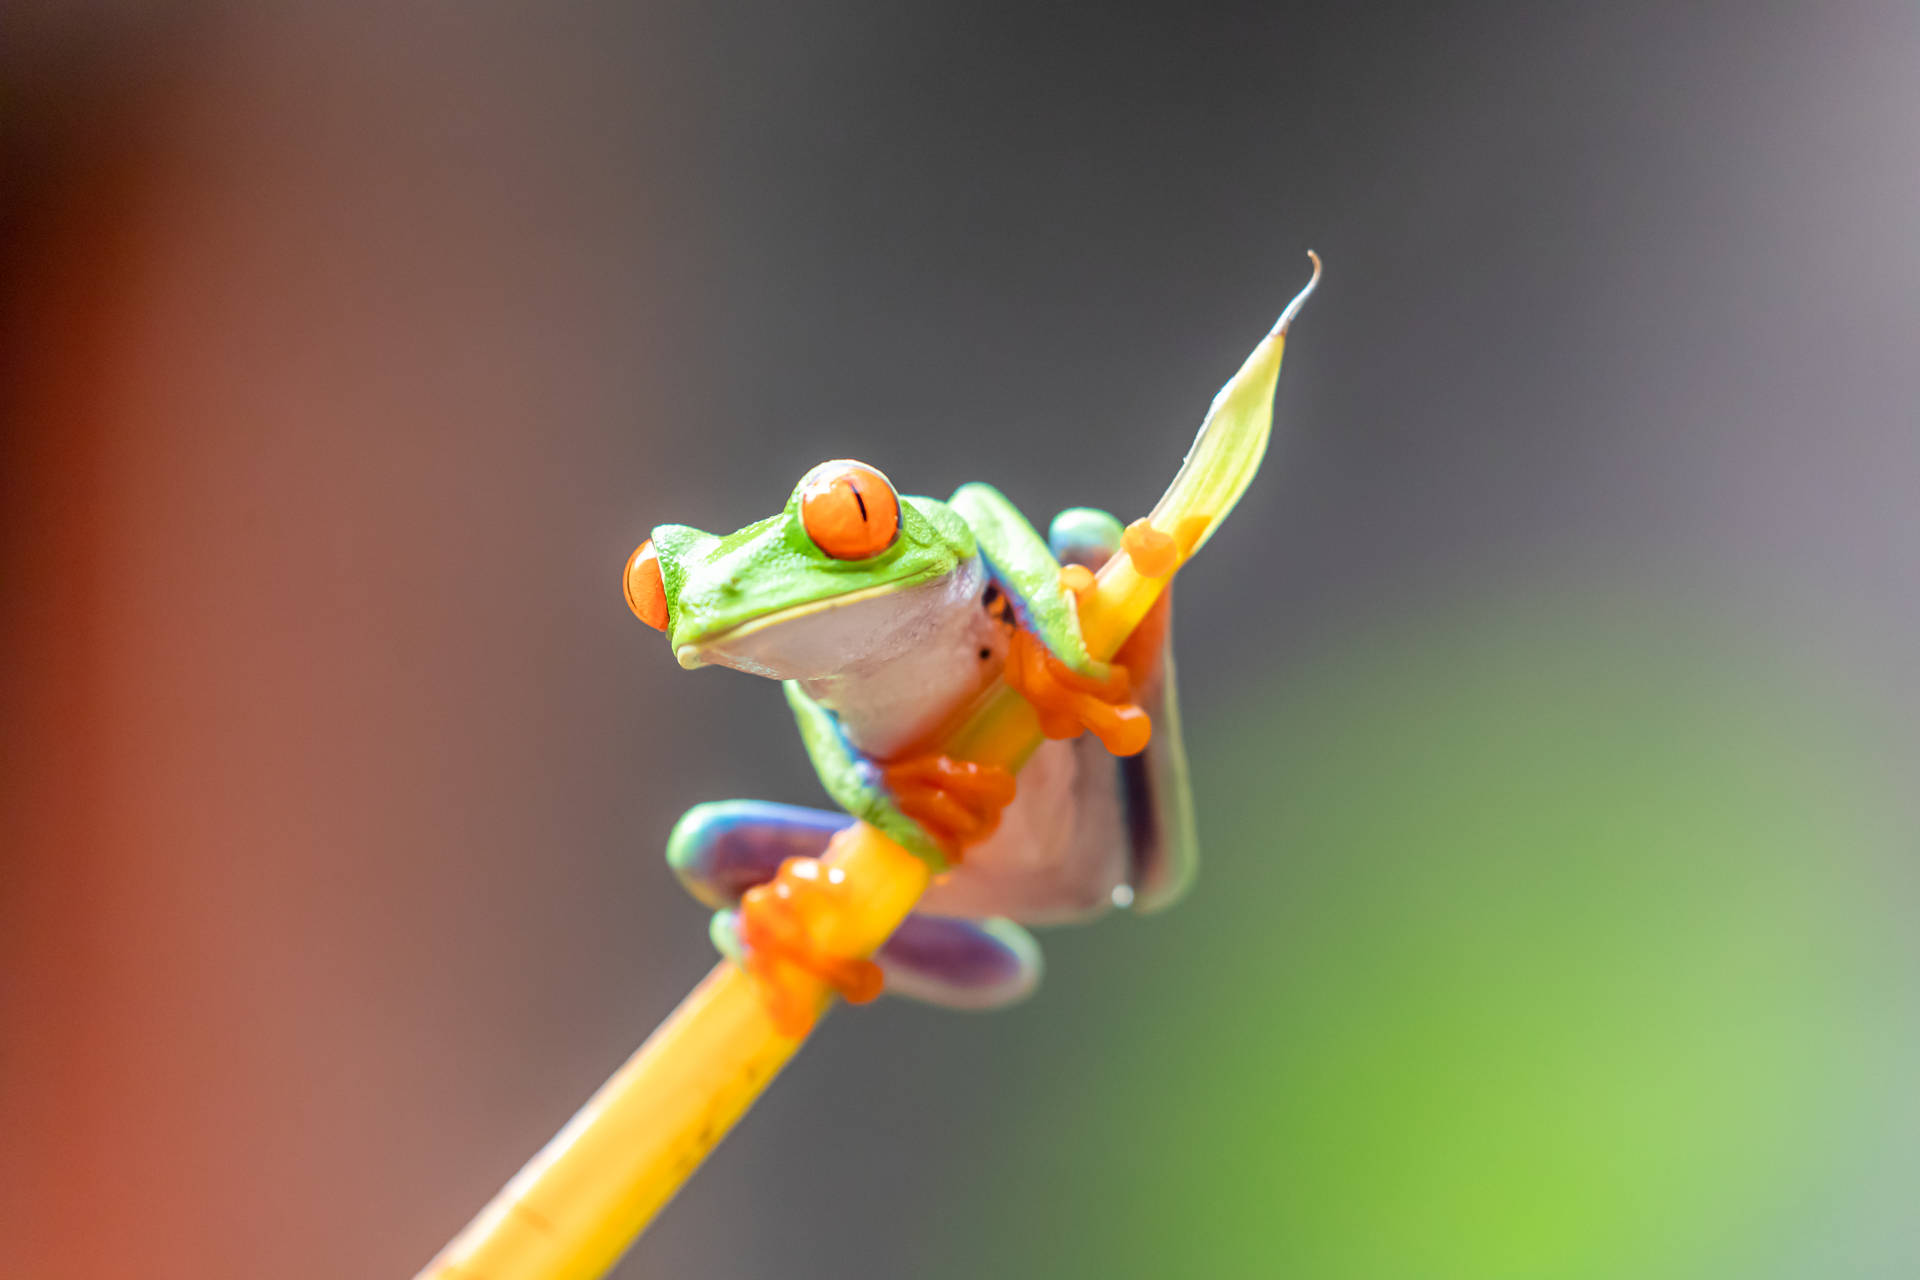 Frog 6240X4160 Wallpaper and Background Image